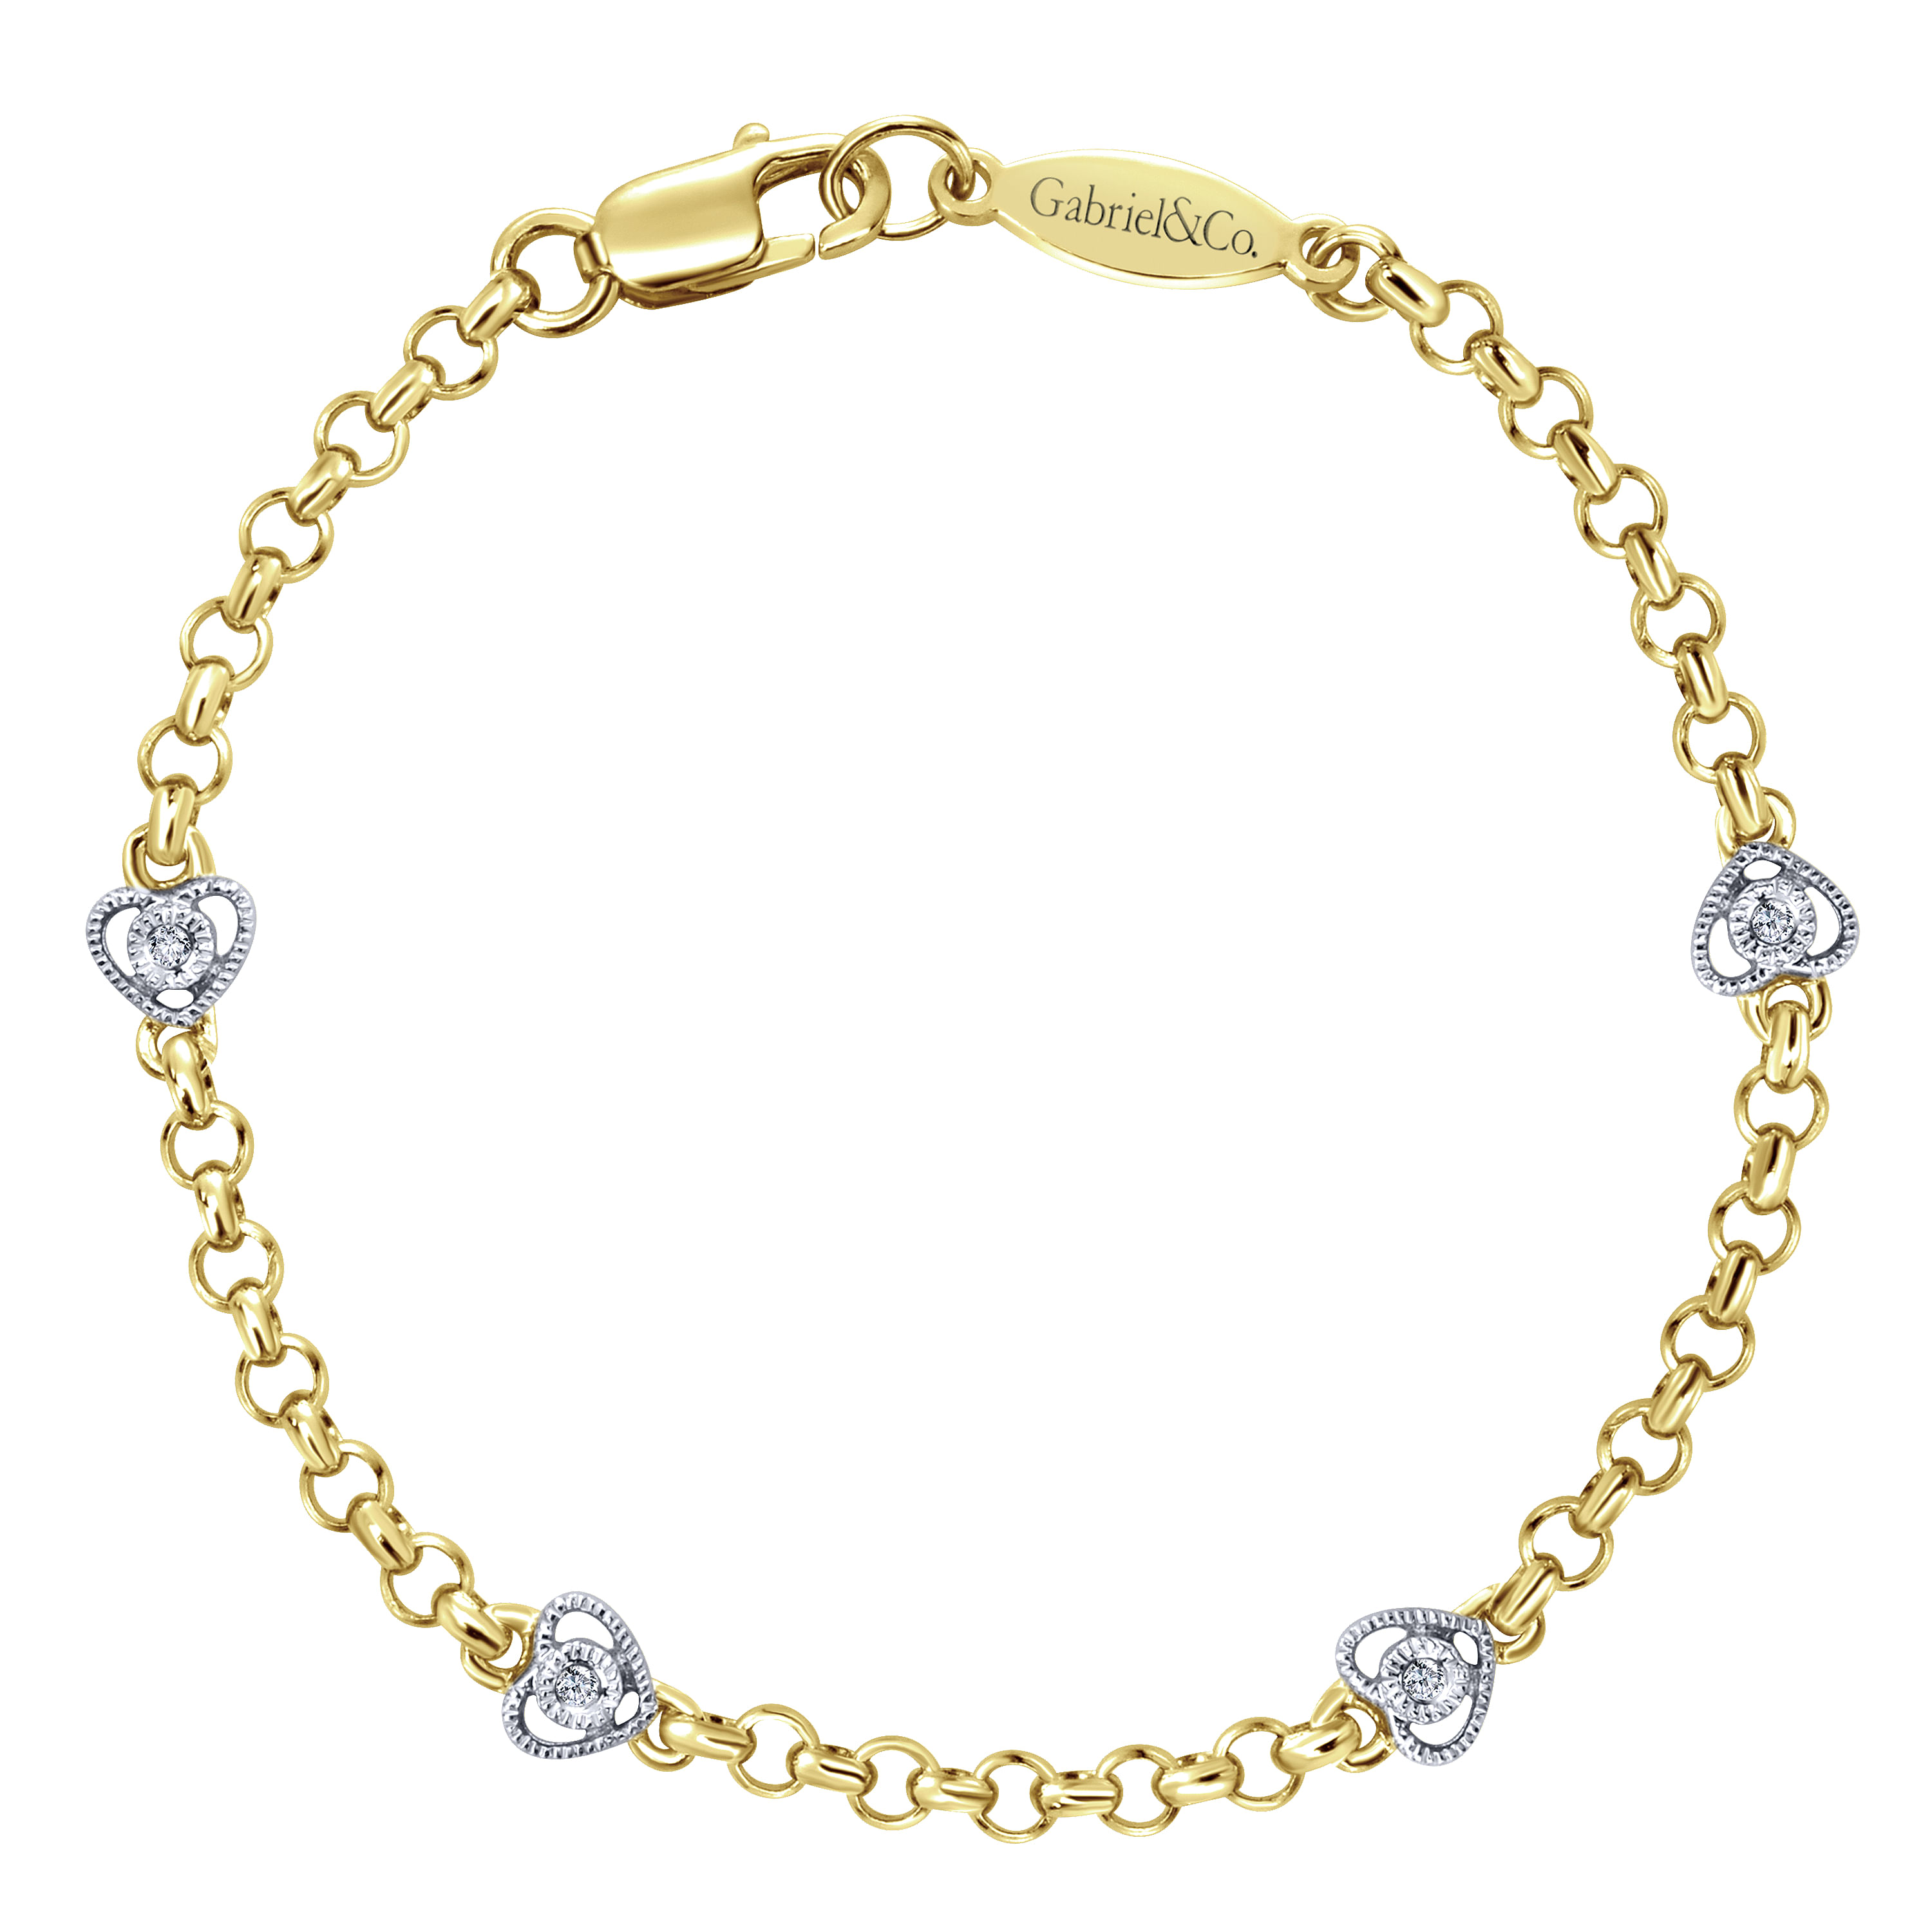 Gabriel - 14K Yellow and White Gold Bracelet with Heart-Shaped Diamond Accents